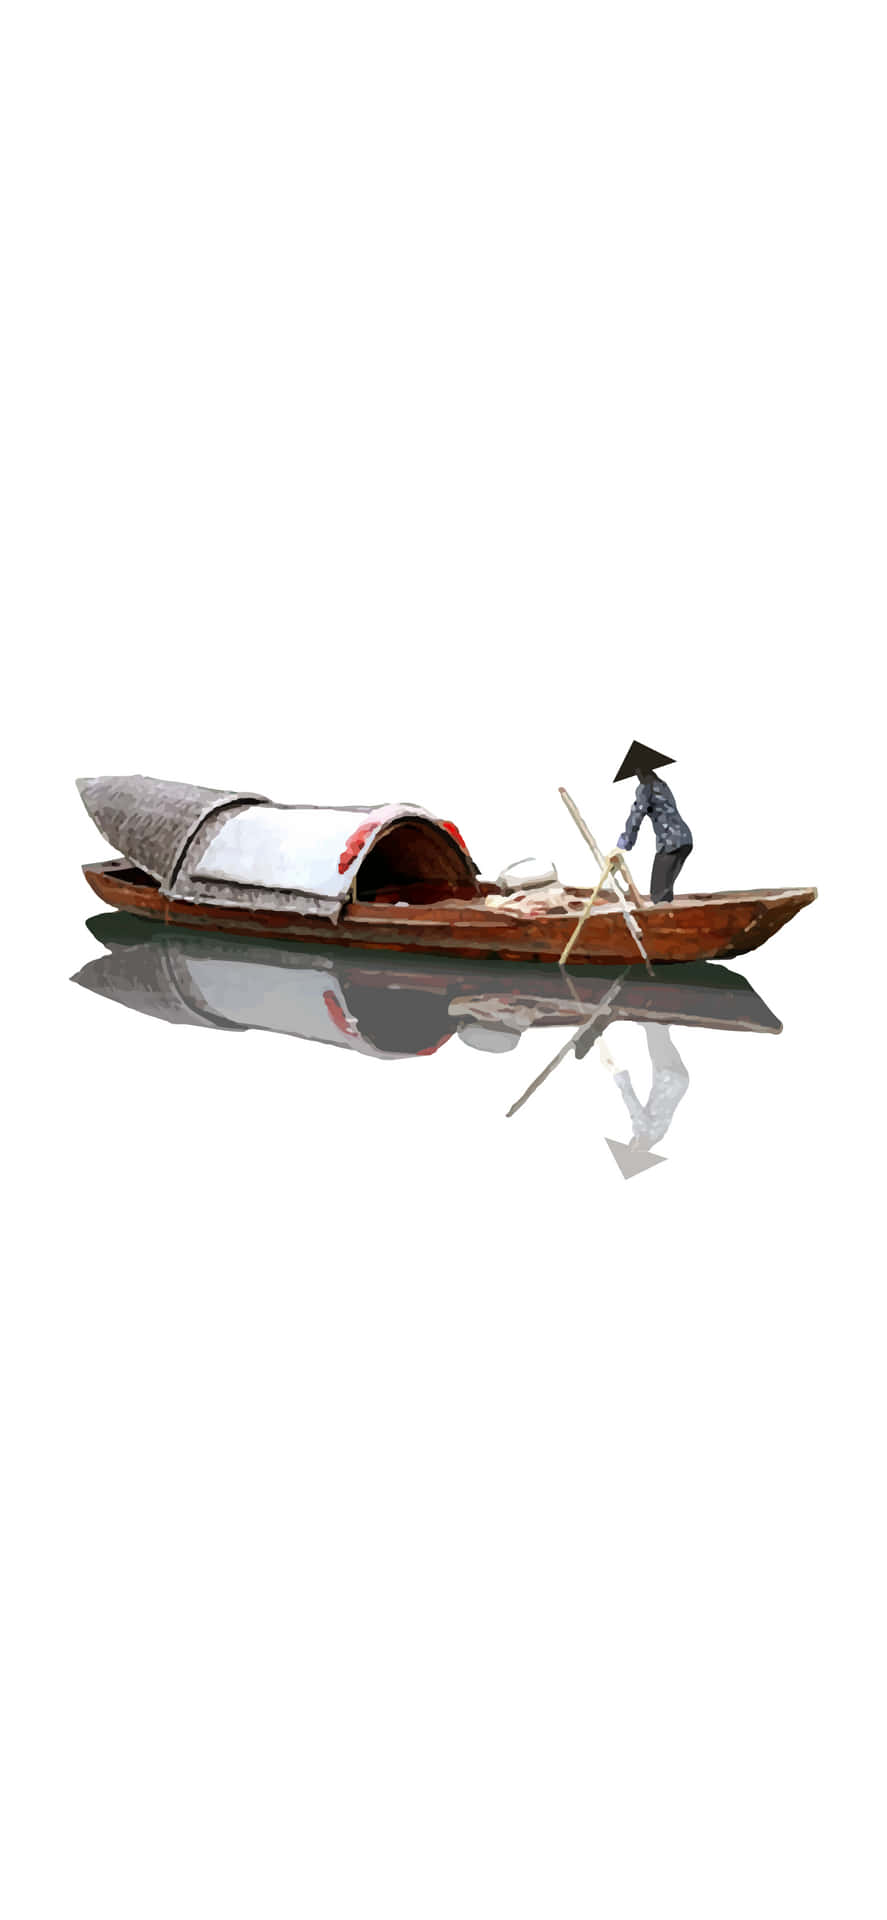 A Small Boat With A Man On It Background